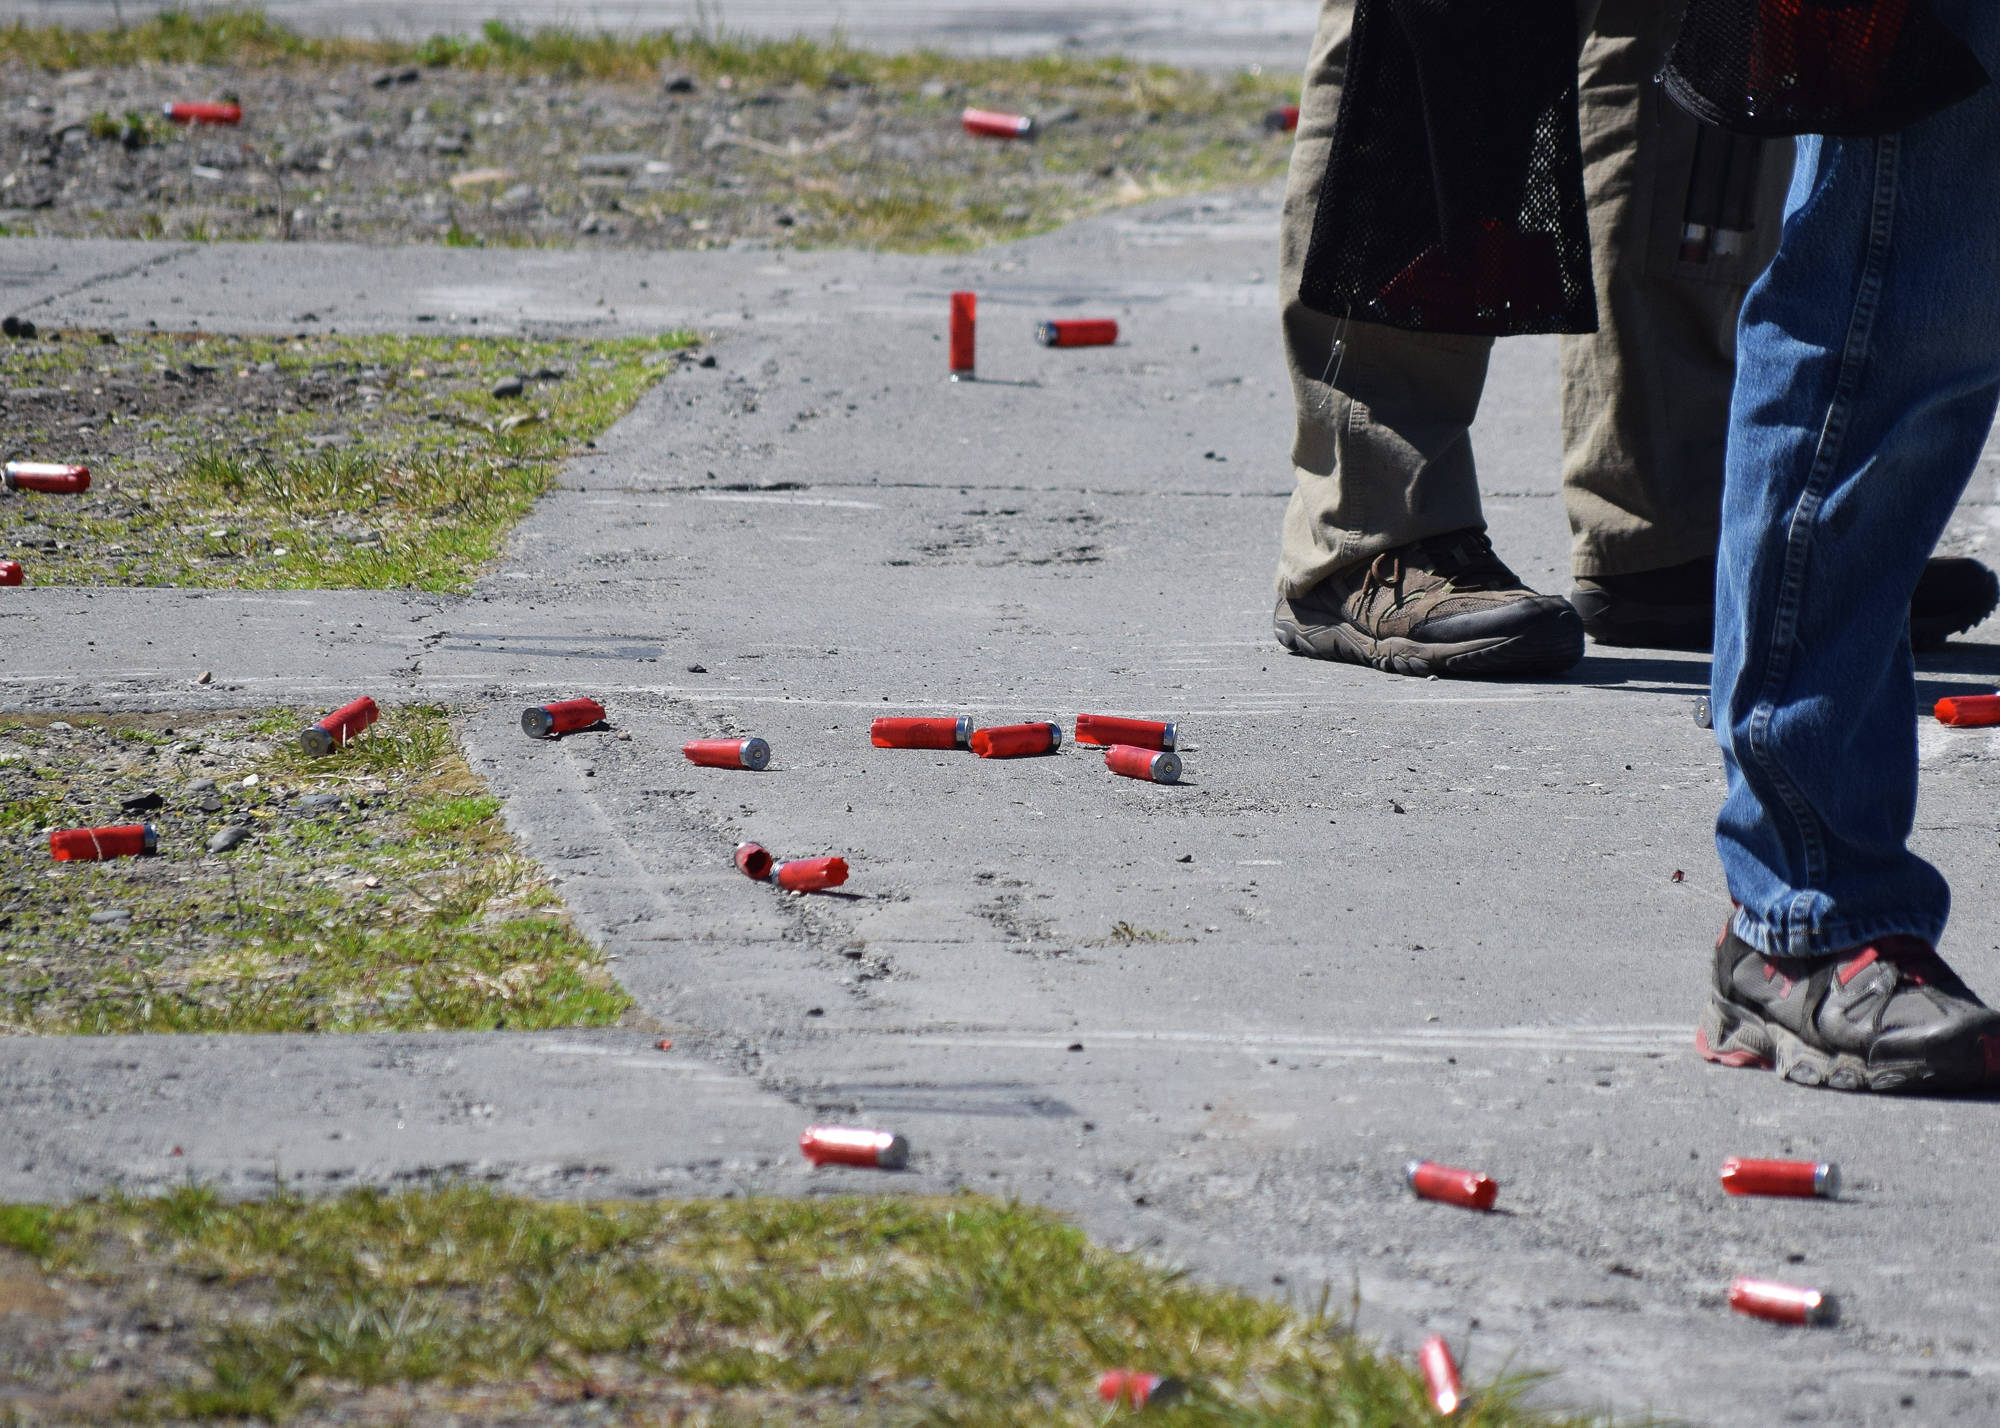 Empty cartridges litter the ground behind a row of shooters June 2 at a scholastic clay shooting event at the Snowshoe Gun Club in Kenai. (Photo by Joey Klecka/Peninsula Clarion)